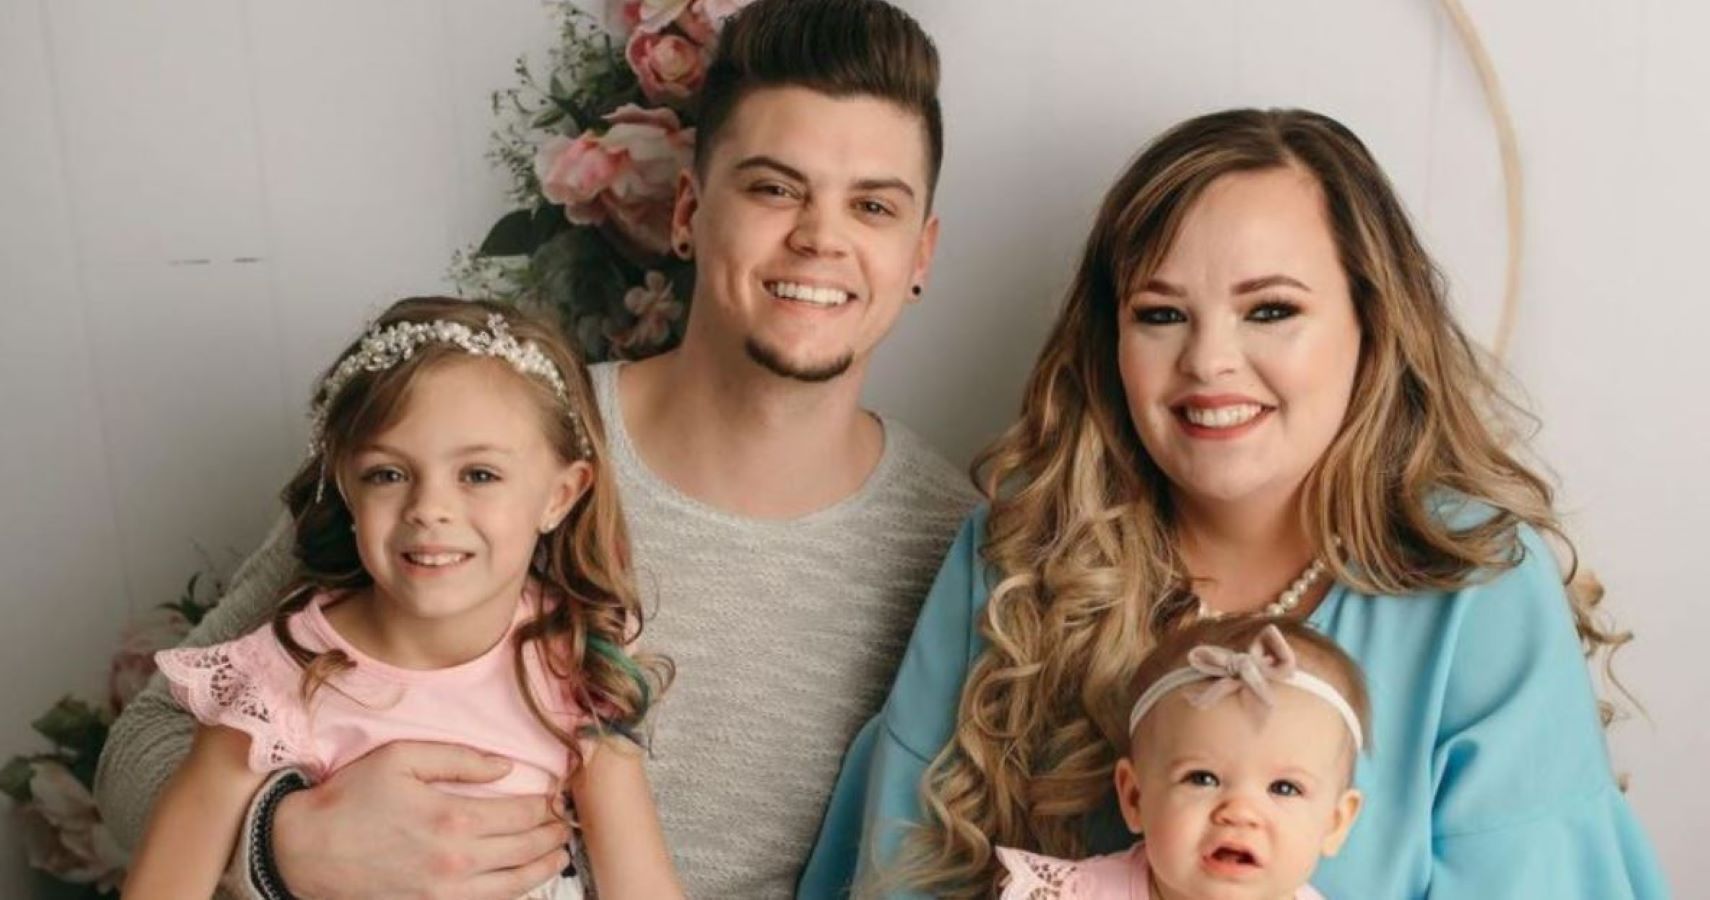 Teen Mom Og Star Catelynn Lowell Reveals She Suffered A Miscarriage